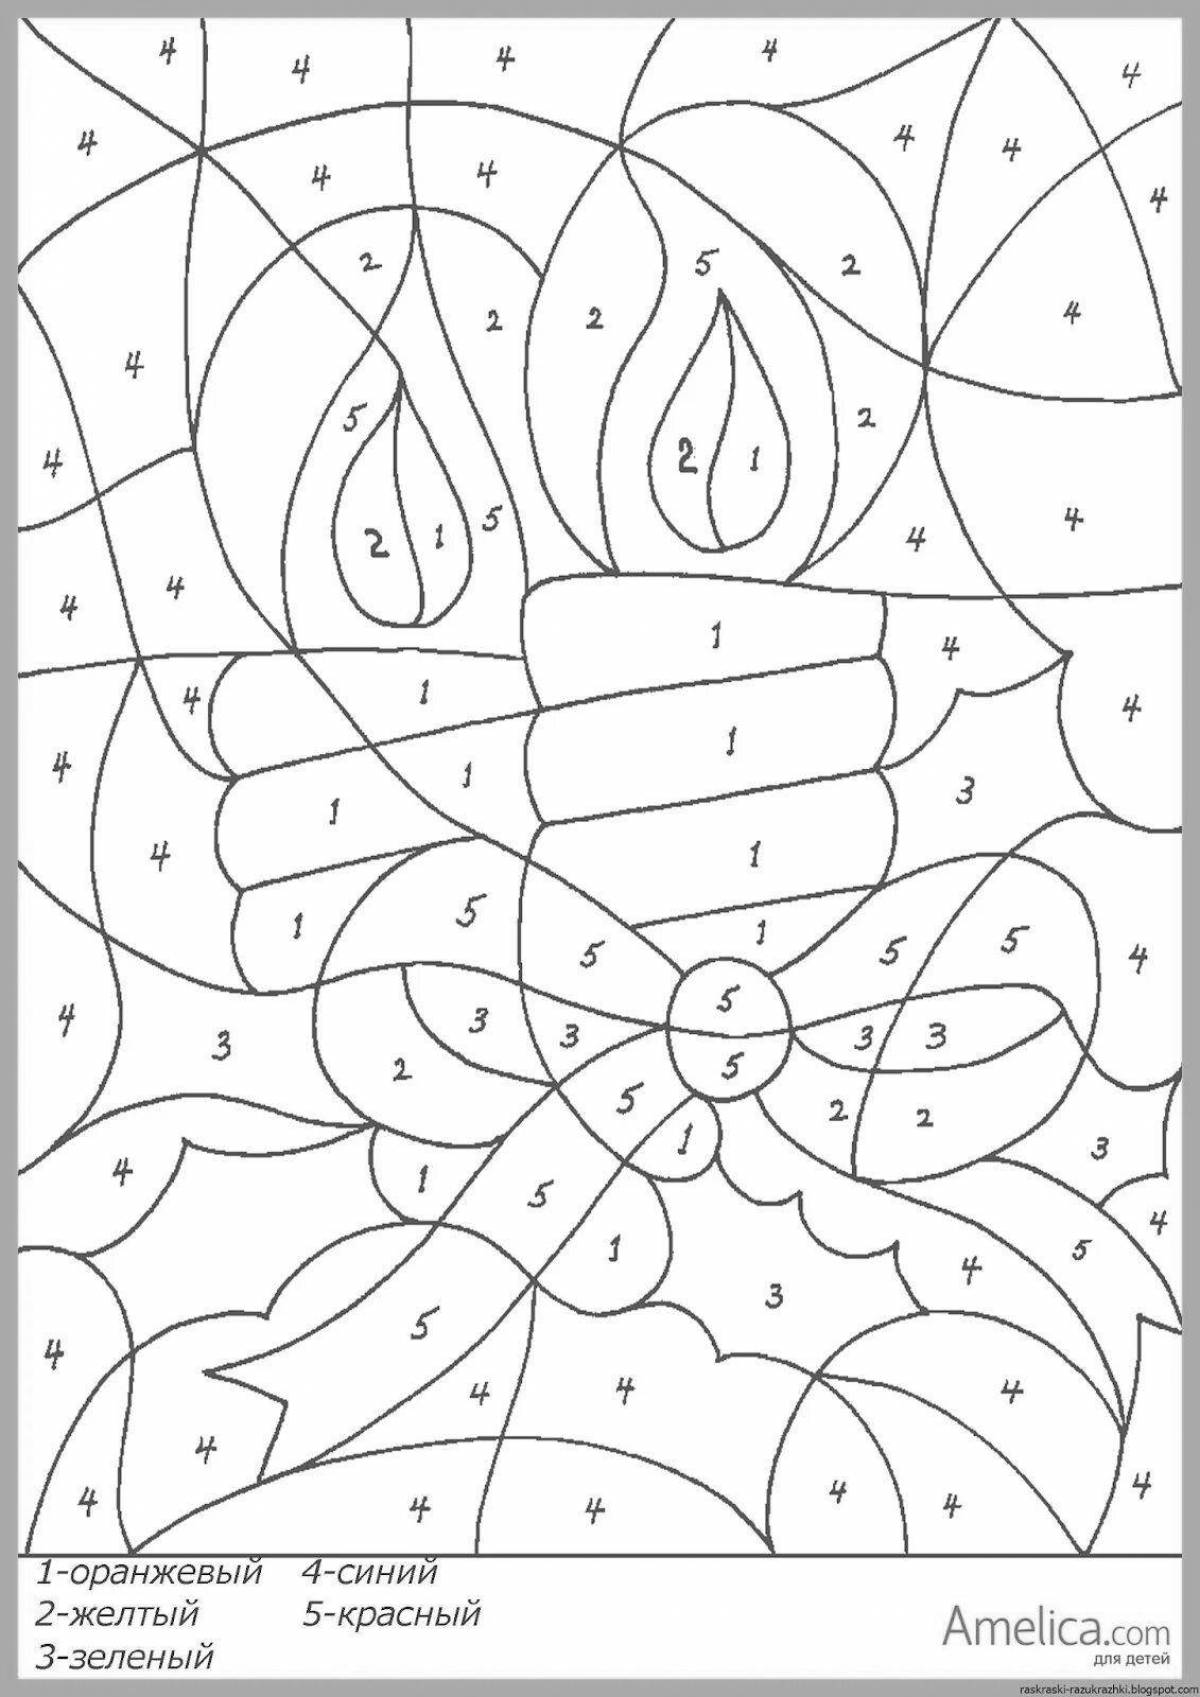 Fabulous Christmas coloring by numbers for kids